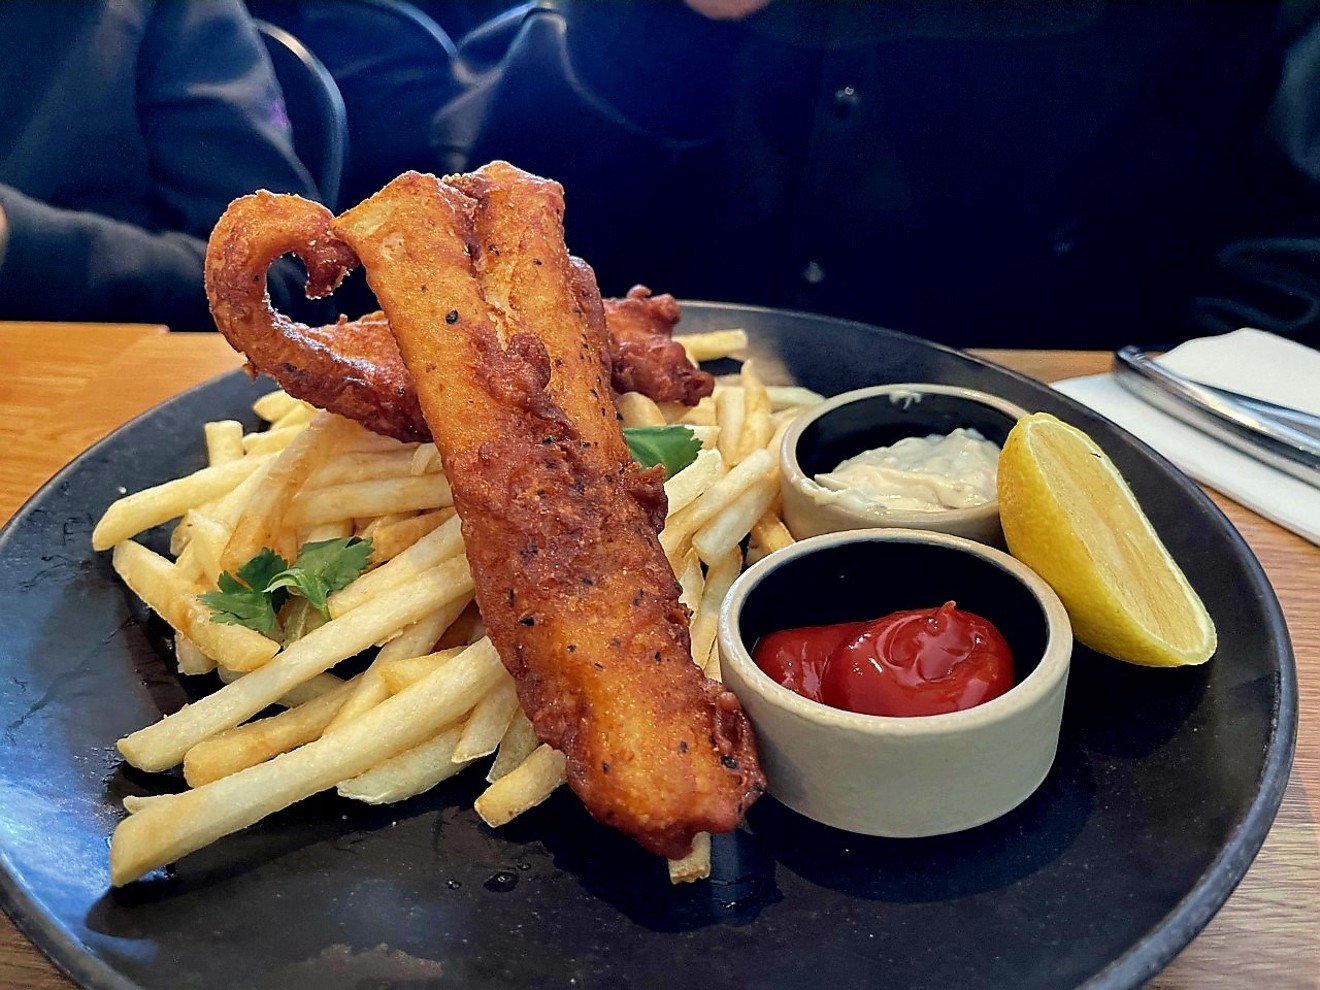 Fish and Chips are served with a yuzo kosho.